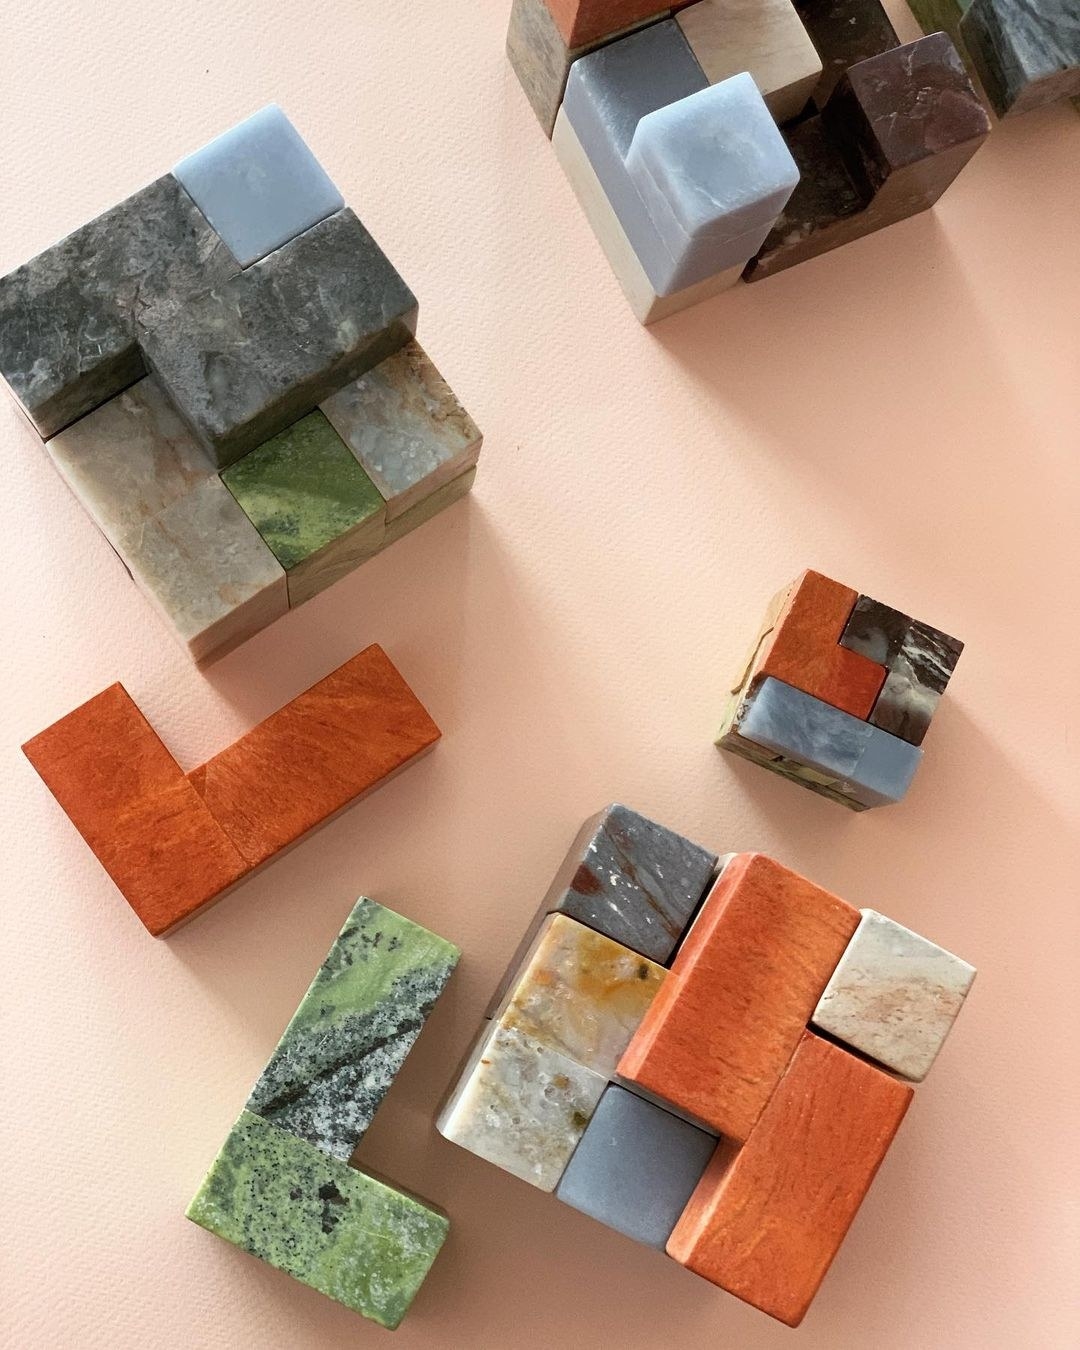 a puzzle cube with each piece made of a different stone